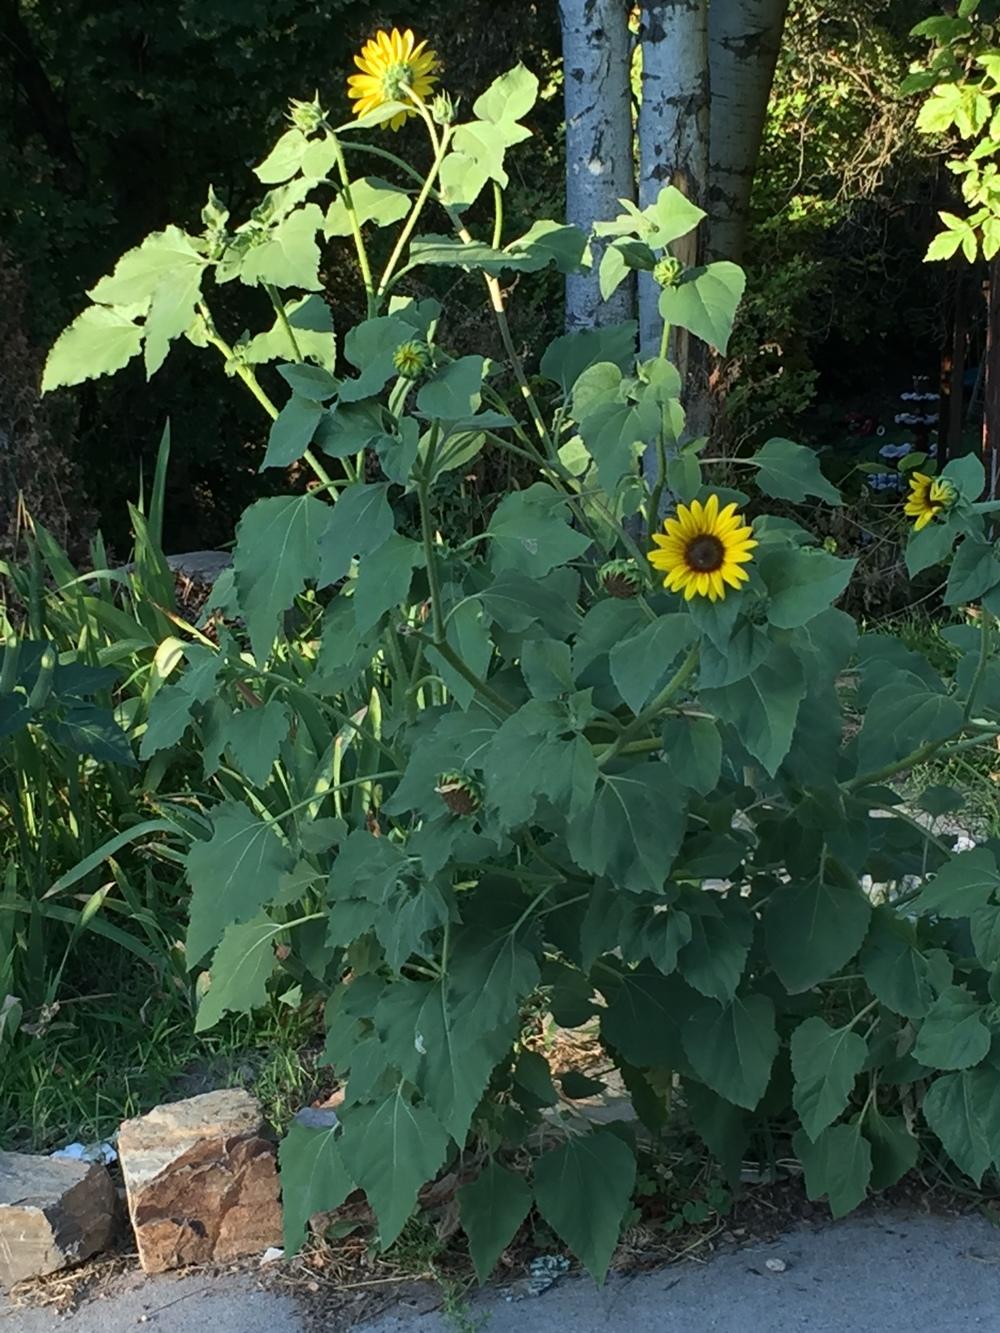 Photo of Sunflowers (Helianthus annuus) uploaded by SpringGreenThumb